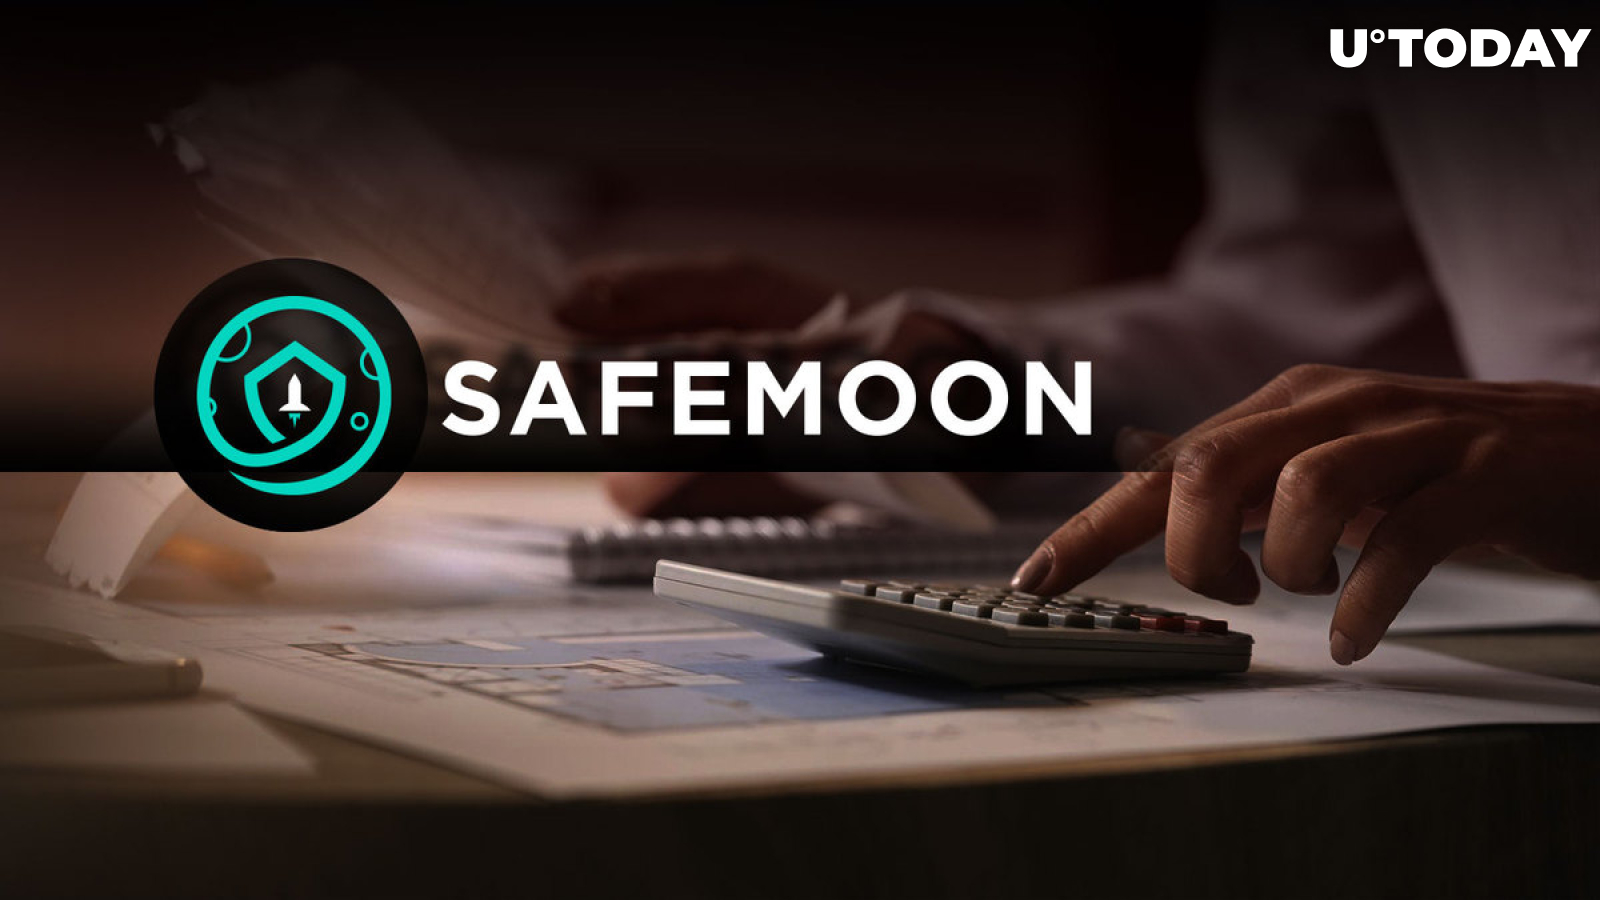 SafeMoon Files for Chapter 7 Bankruptcy, Bizarre Price Reaction Emerges